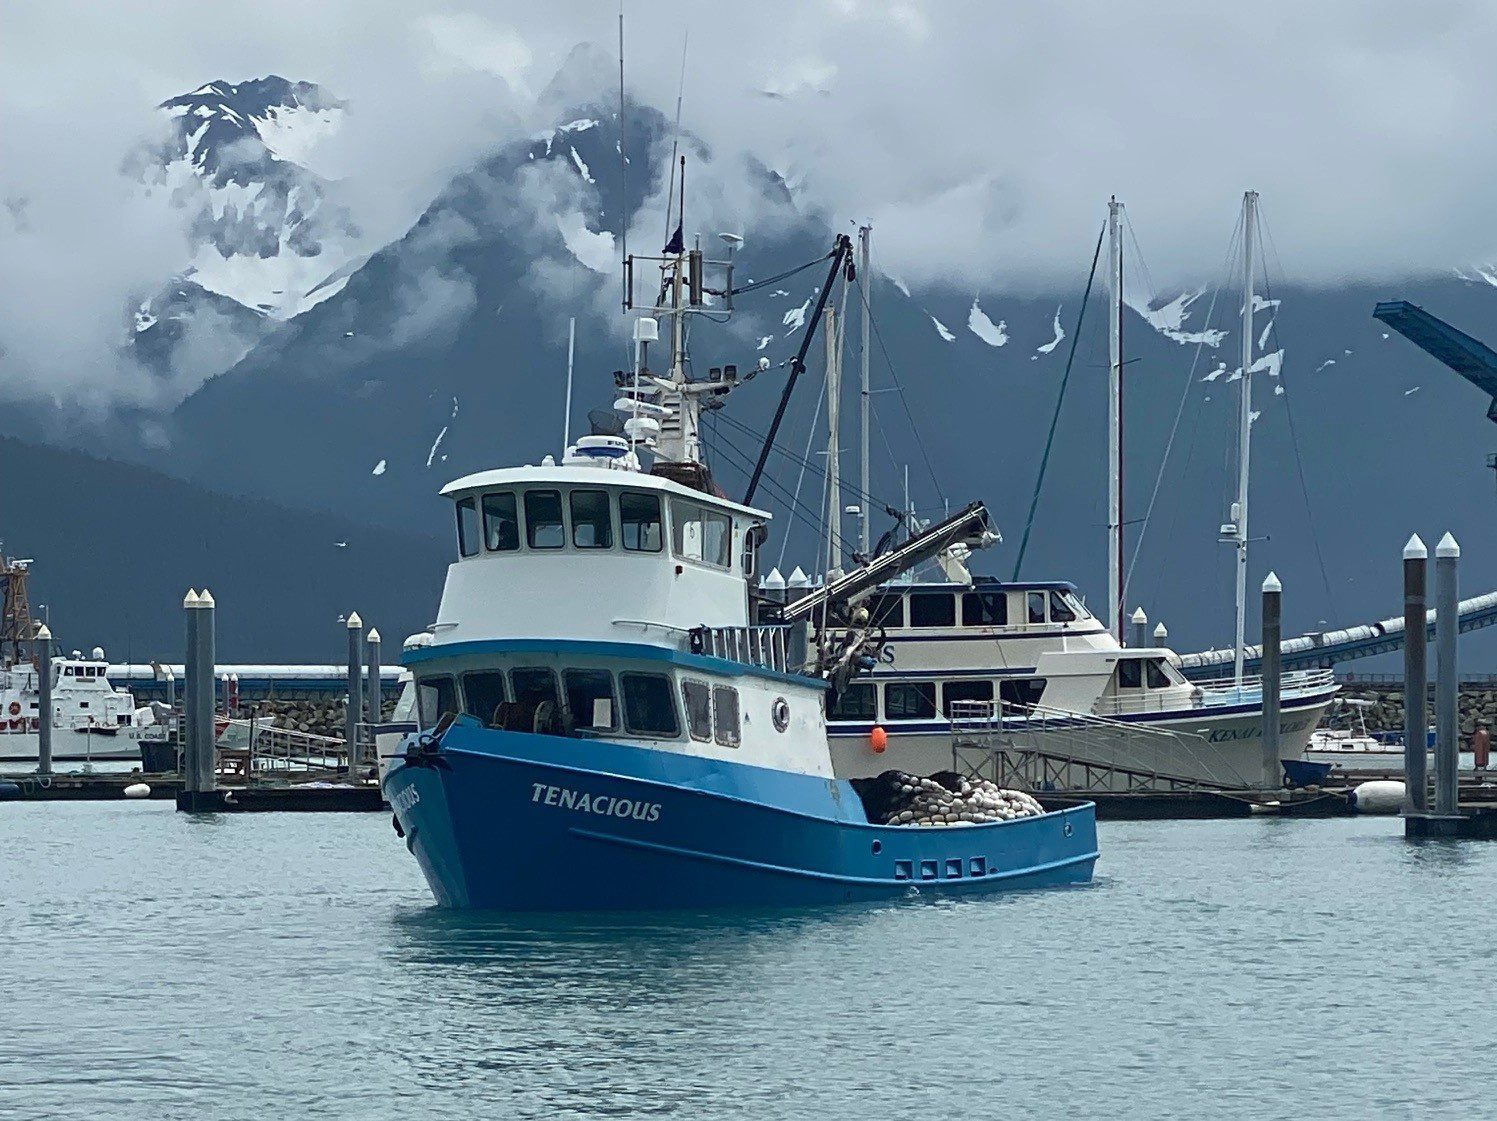 Captain’s Fatigue Led to Sinking of Fishing Vessel in Alaska